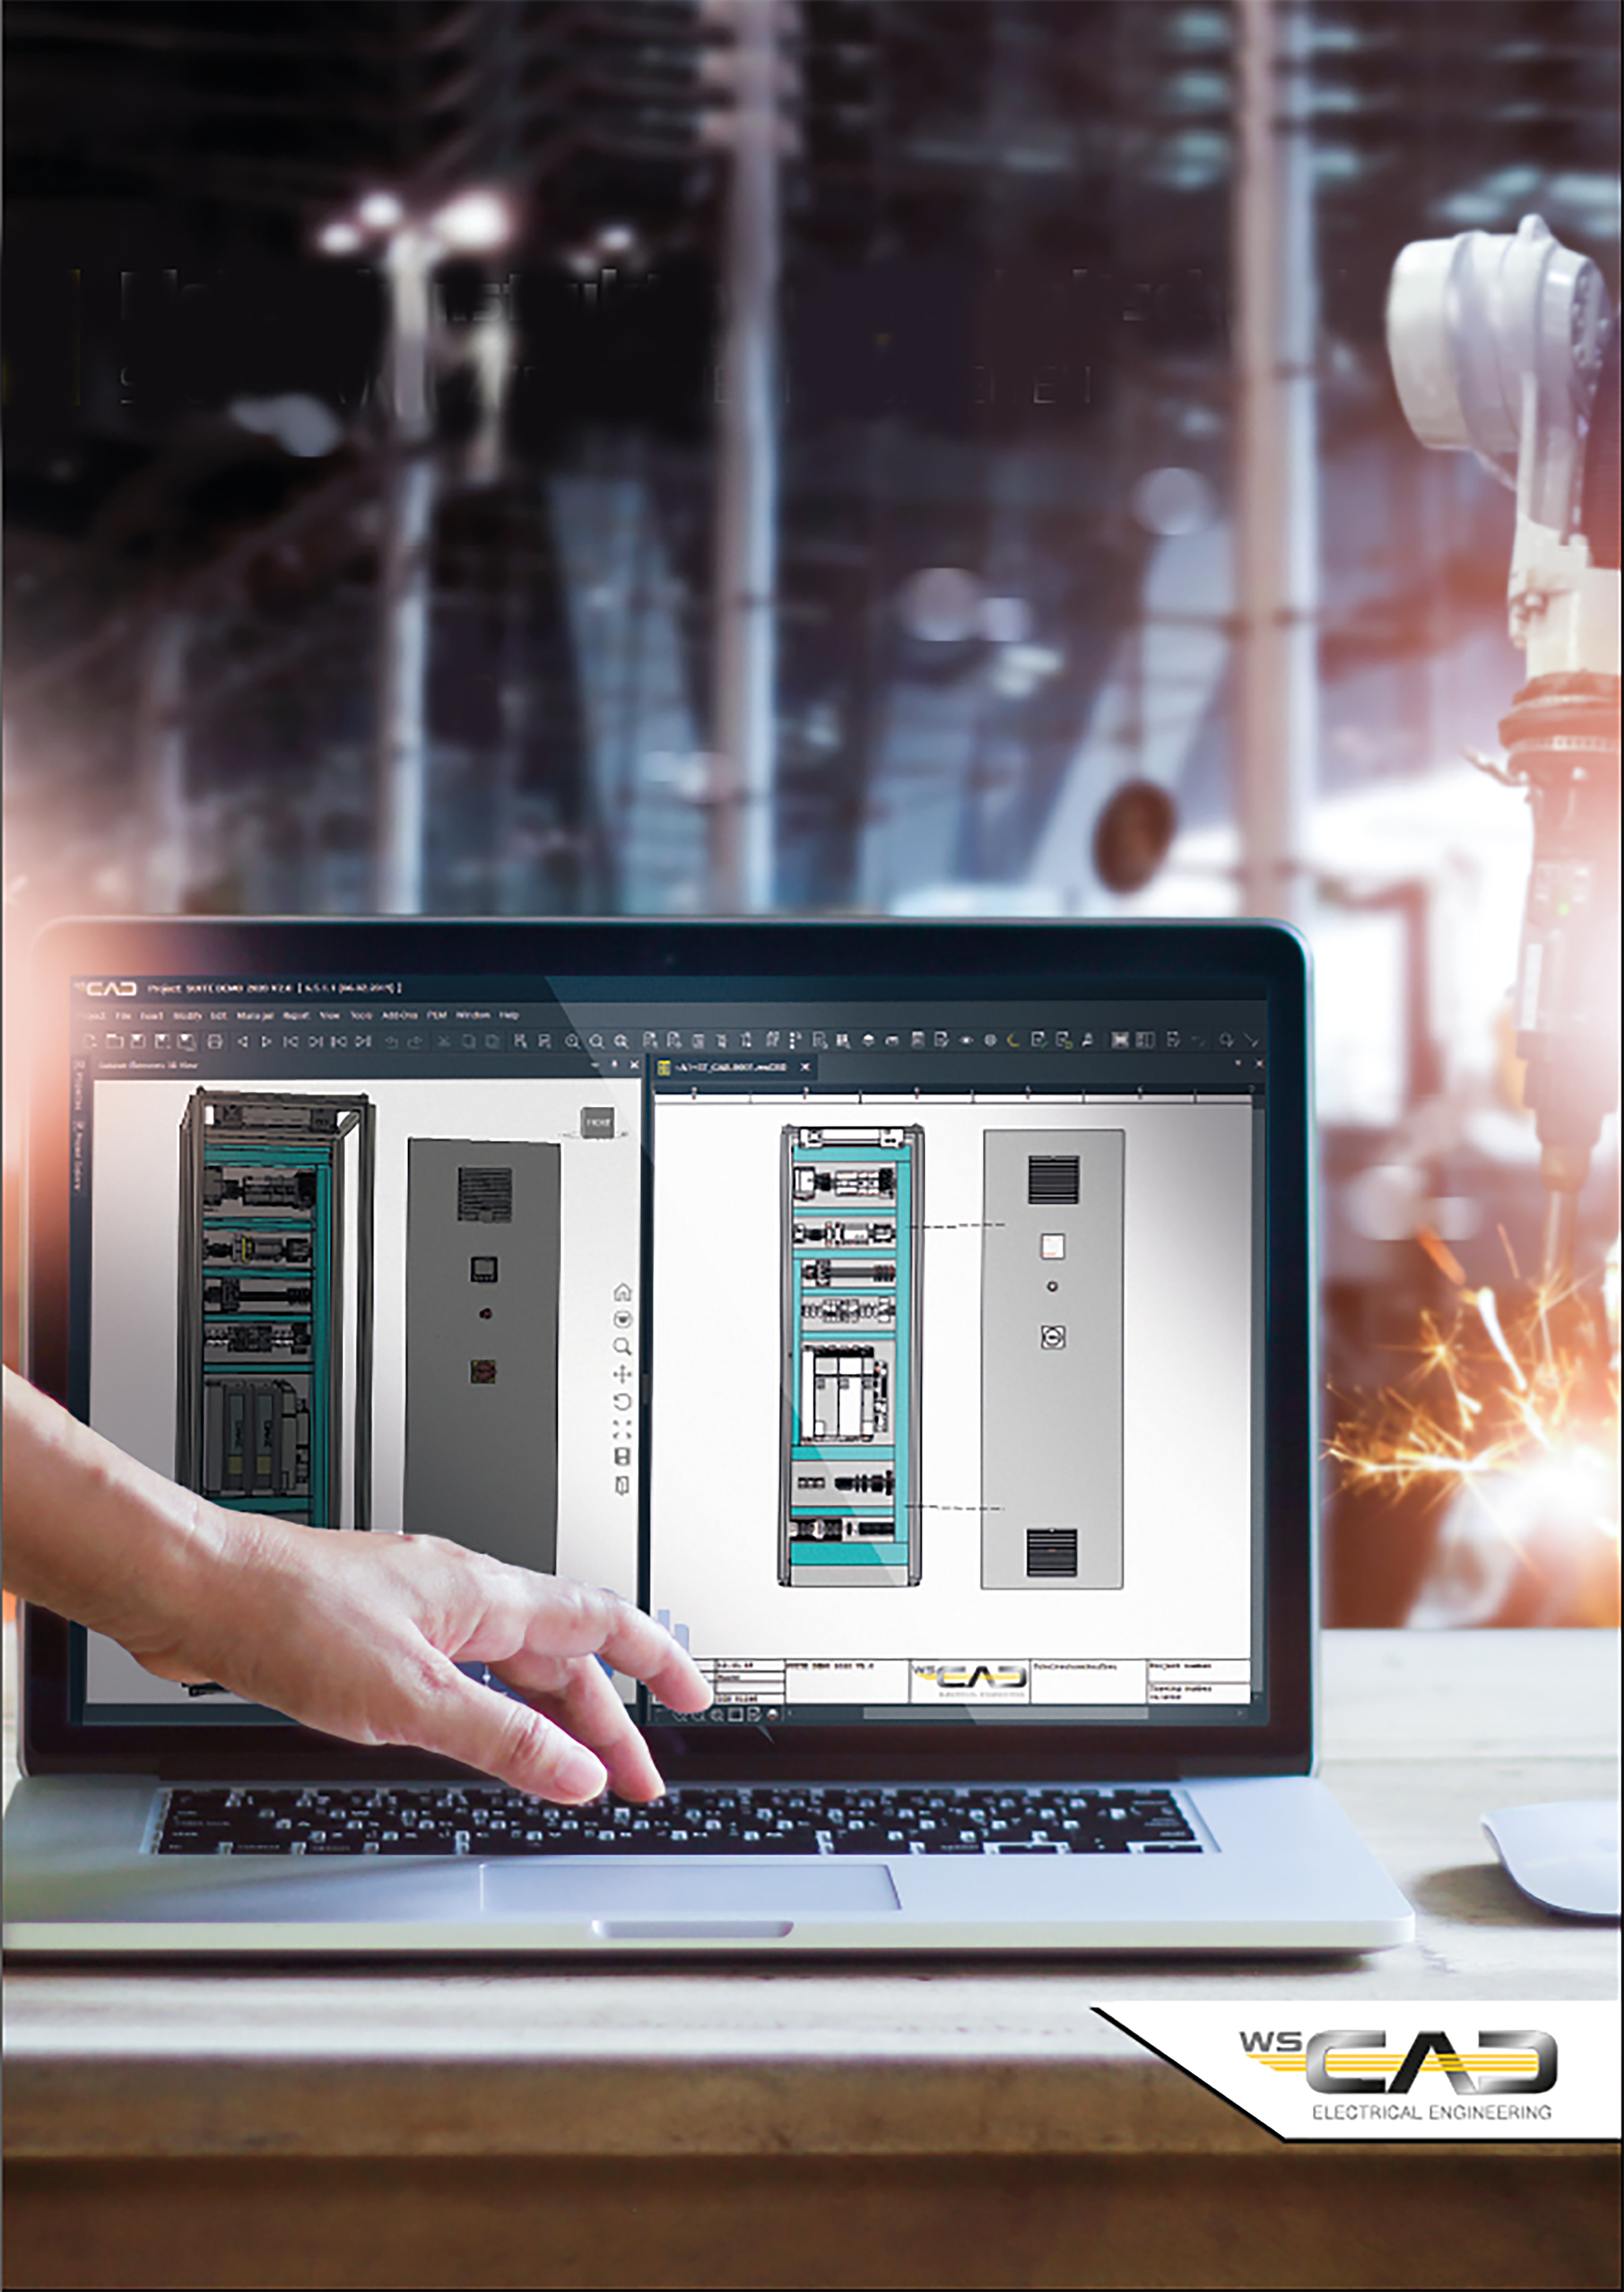 Cabinet engineering with WSCAD is quick and easy. The continuous digitalisation of processes unlocks increased automation in engineering and production backed by consistent quality.